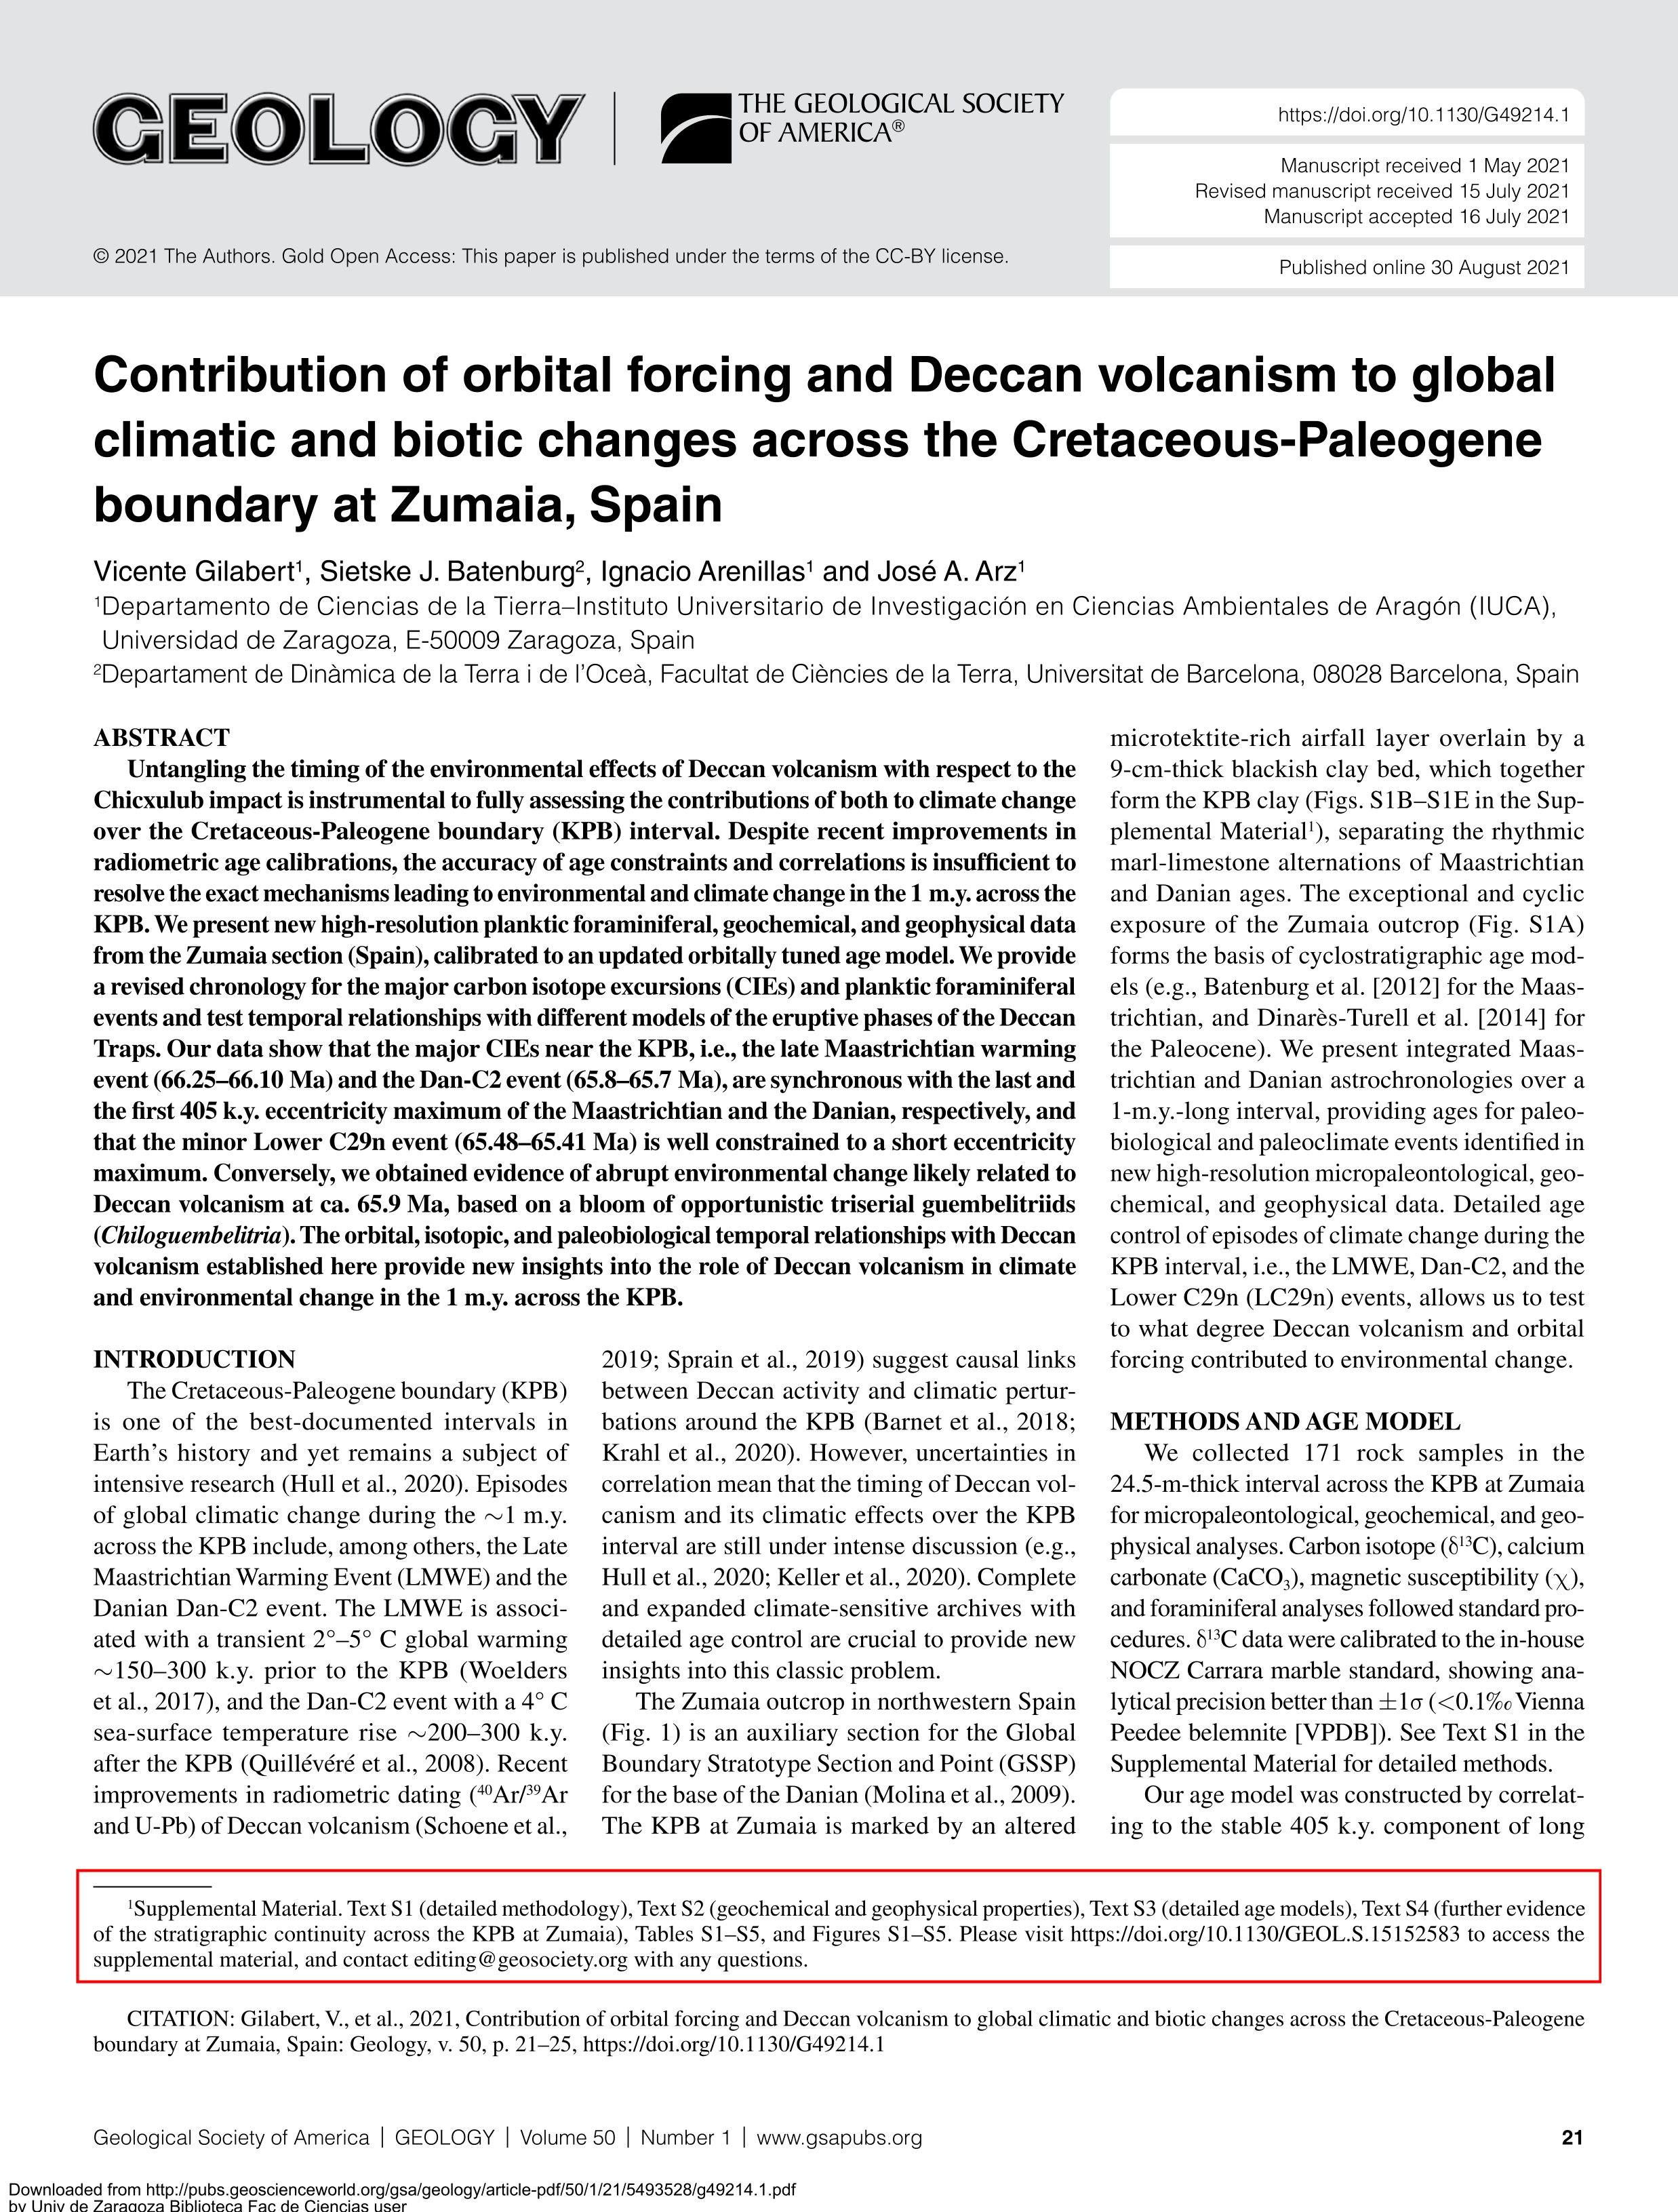 Contribution of orbital forcing and Deccan volcanism to global climatic and biotic changes across the Cretaceous-Paleogene boundary at Zumaia, Spain